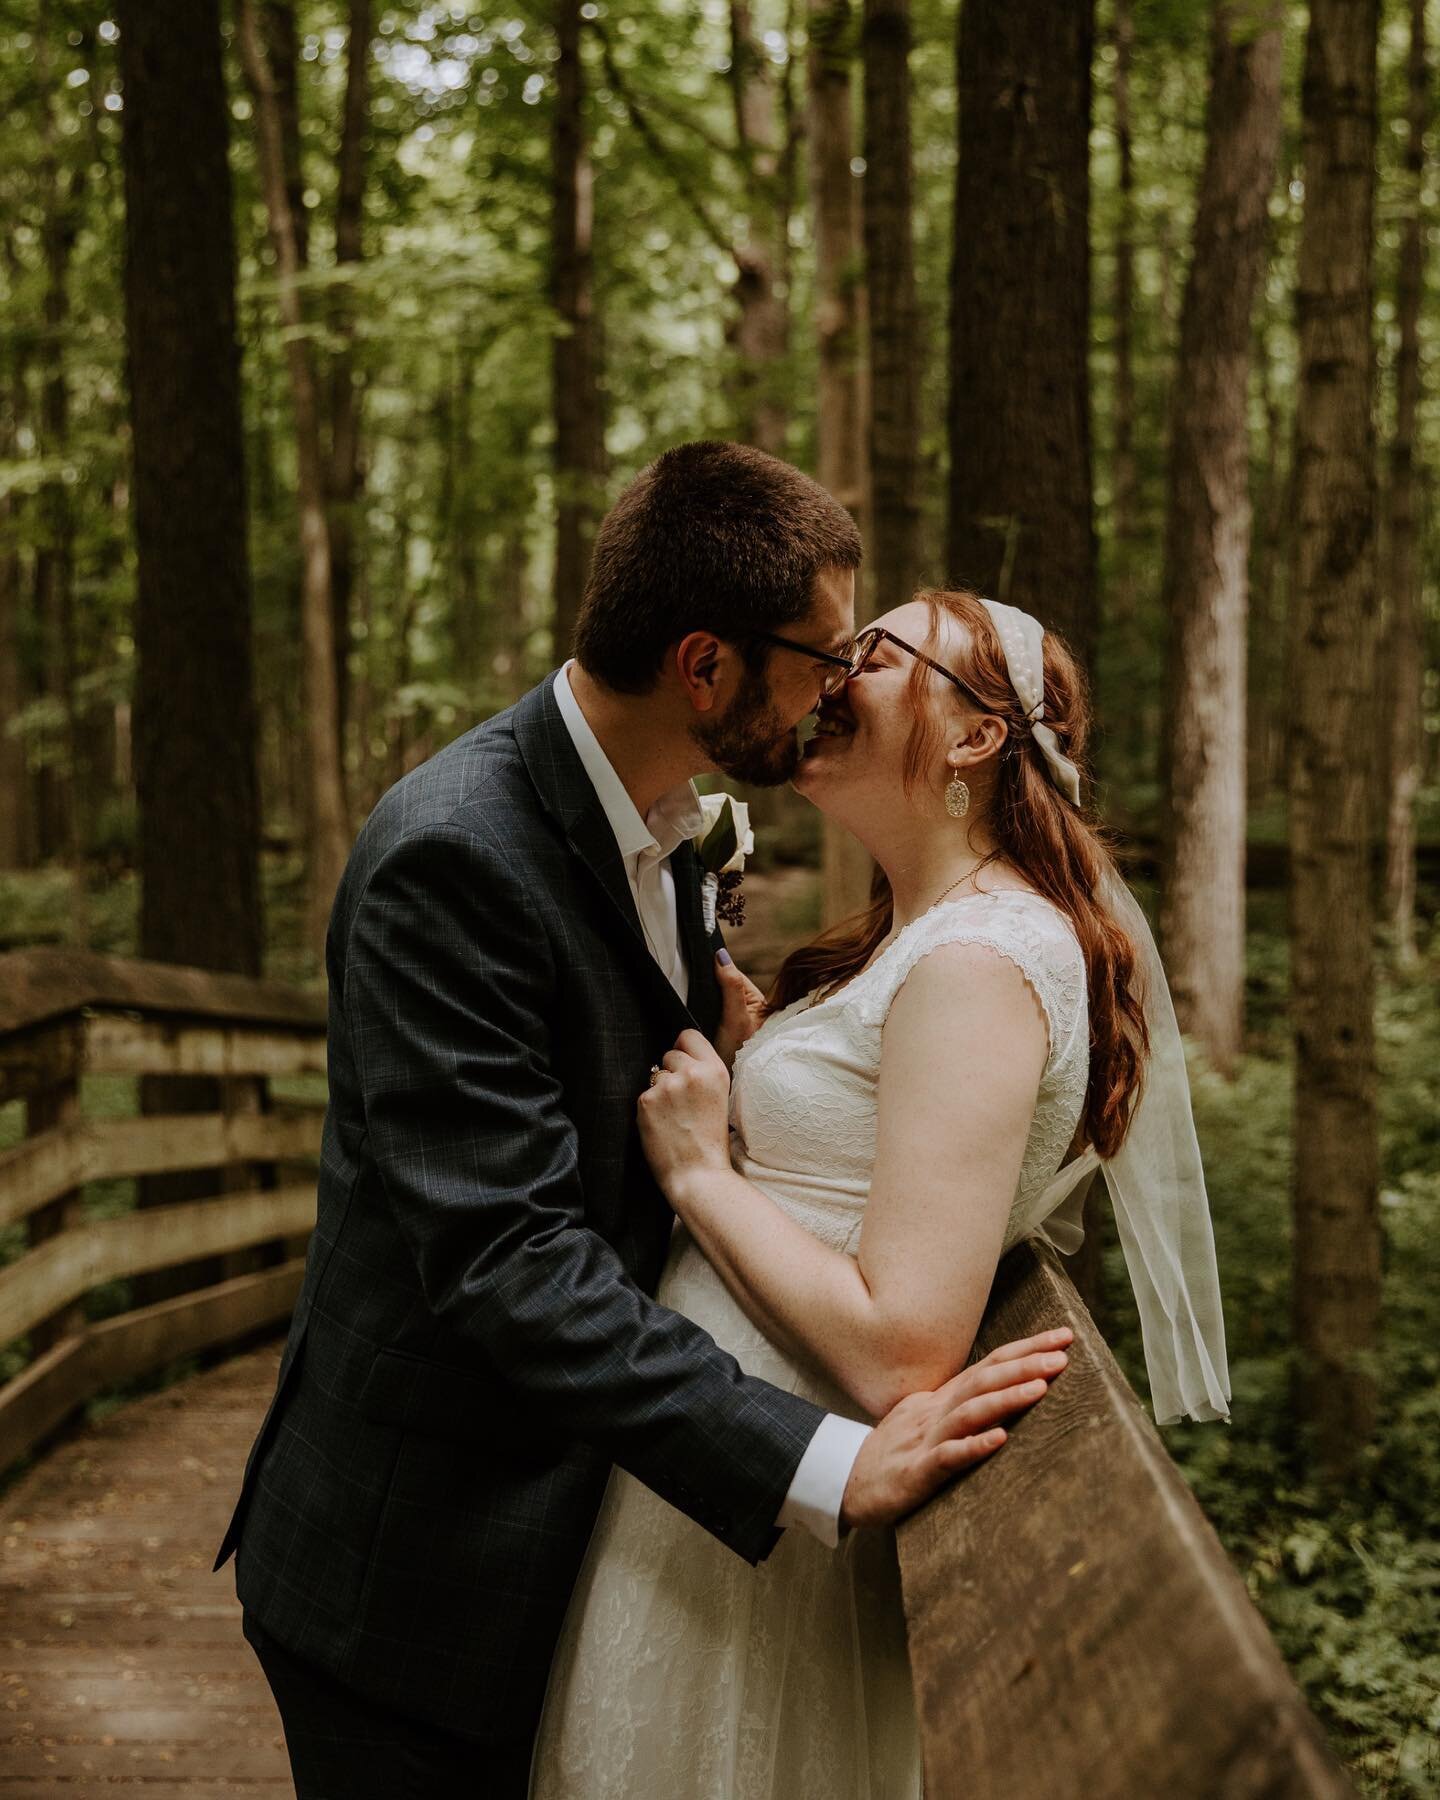 Highly recommend getting married among the trees 🌲 
.
.
.
.
#indianapoliselopementphotographer #indianaelopementphotographer #indyelopementphotographer #muncieweddingphotographer #northwestindianaweddingplanner #indianapolisweddingphotographer #indi